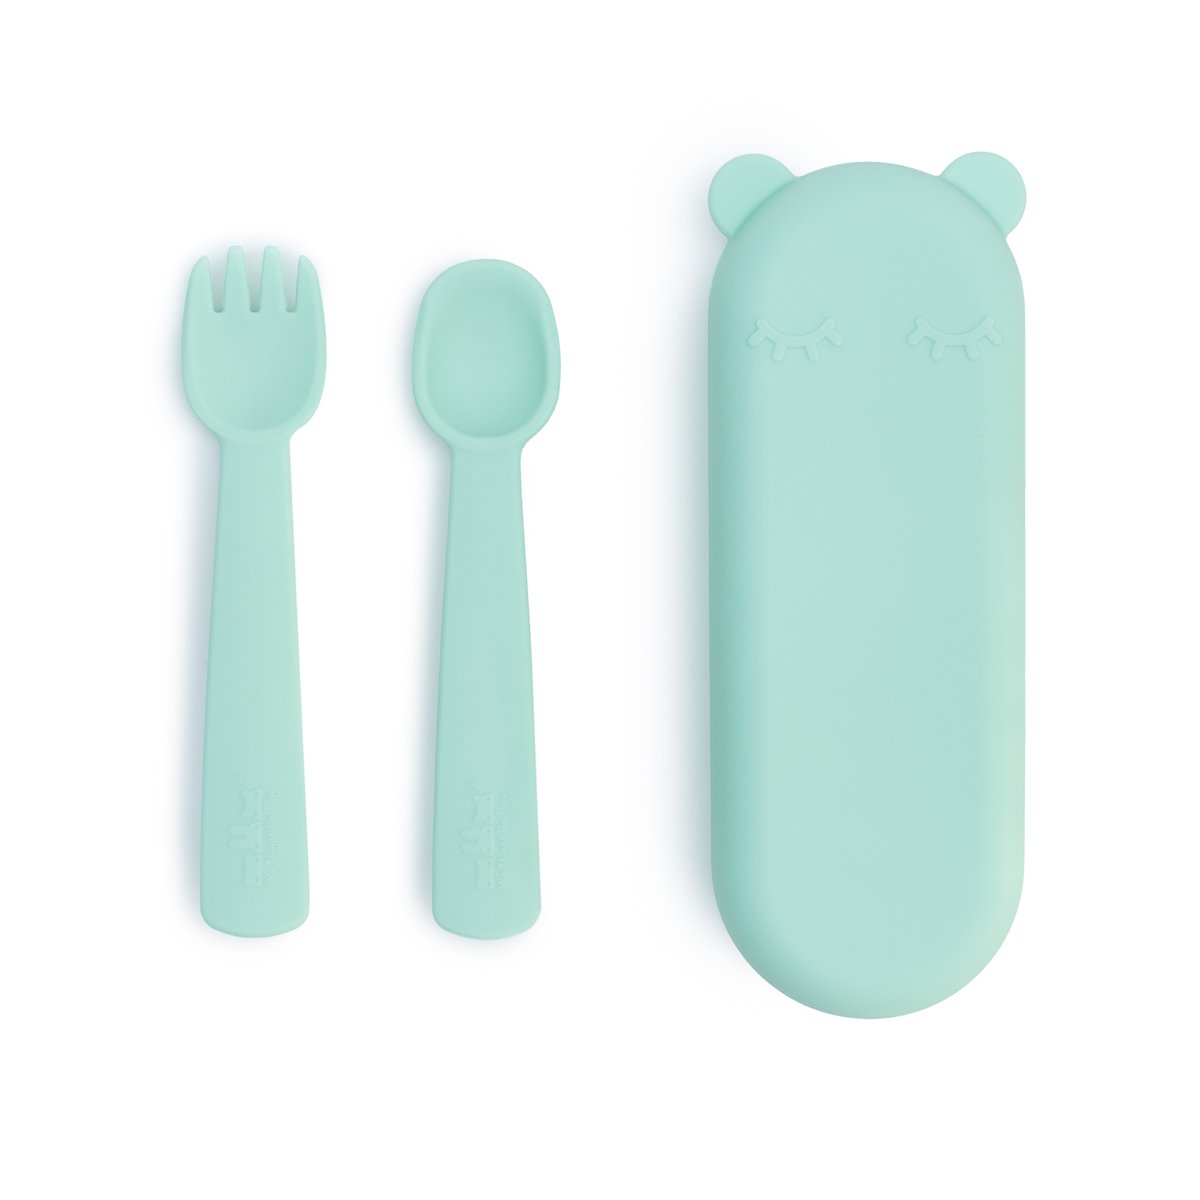 Baby Utensils Spoons Forks Sets With Travel Safe Case, Easy Grip